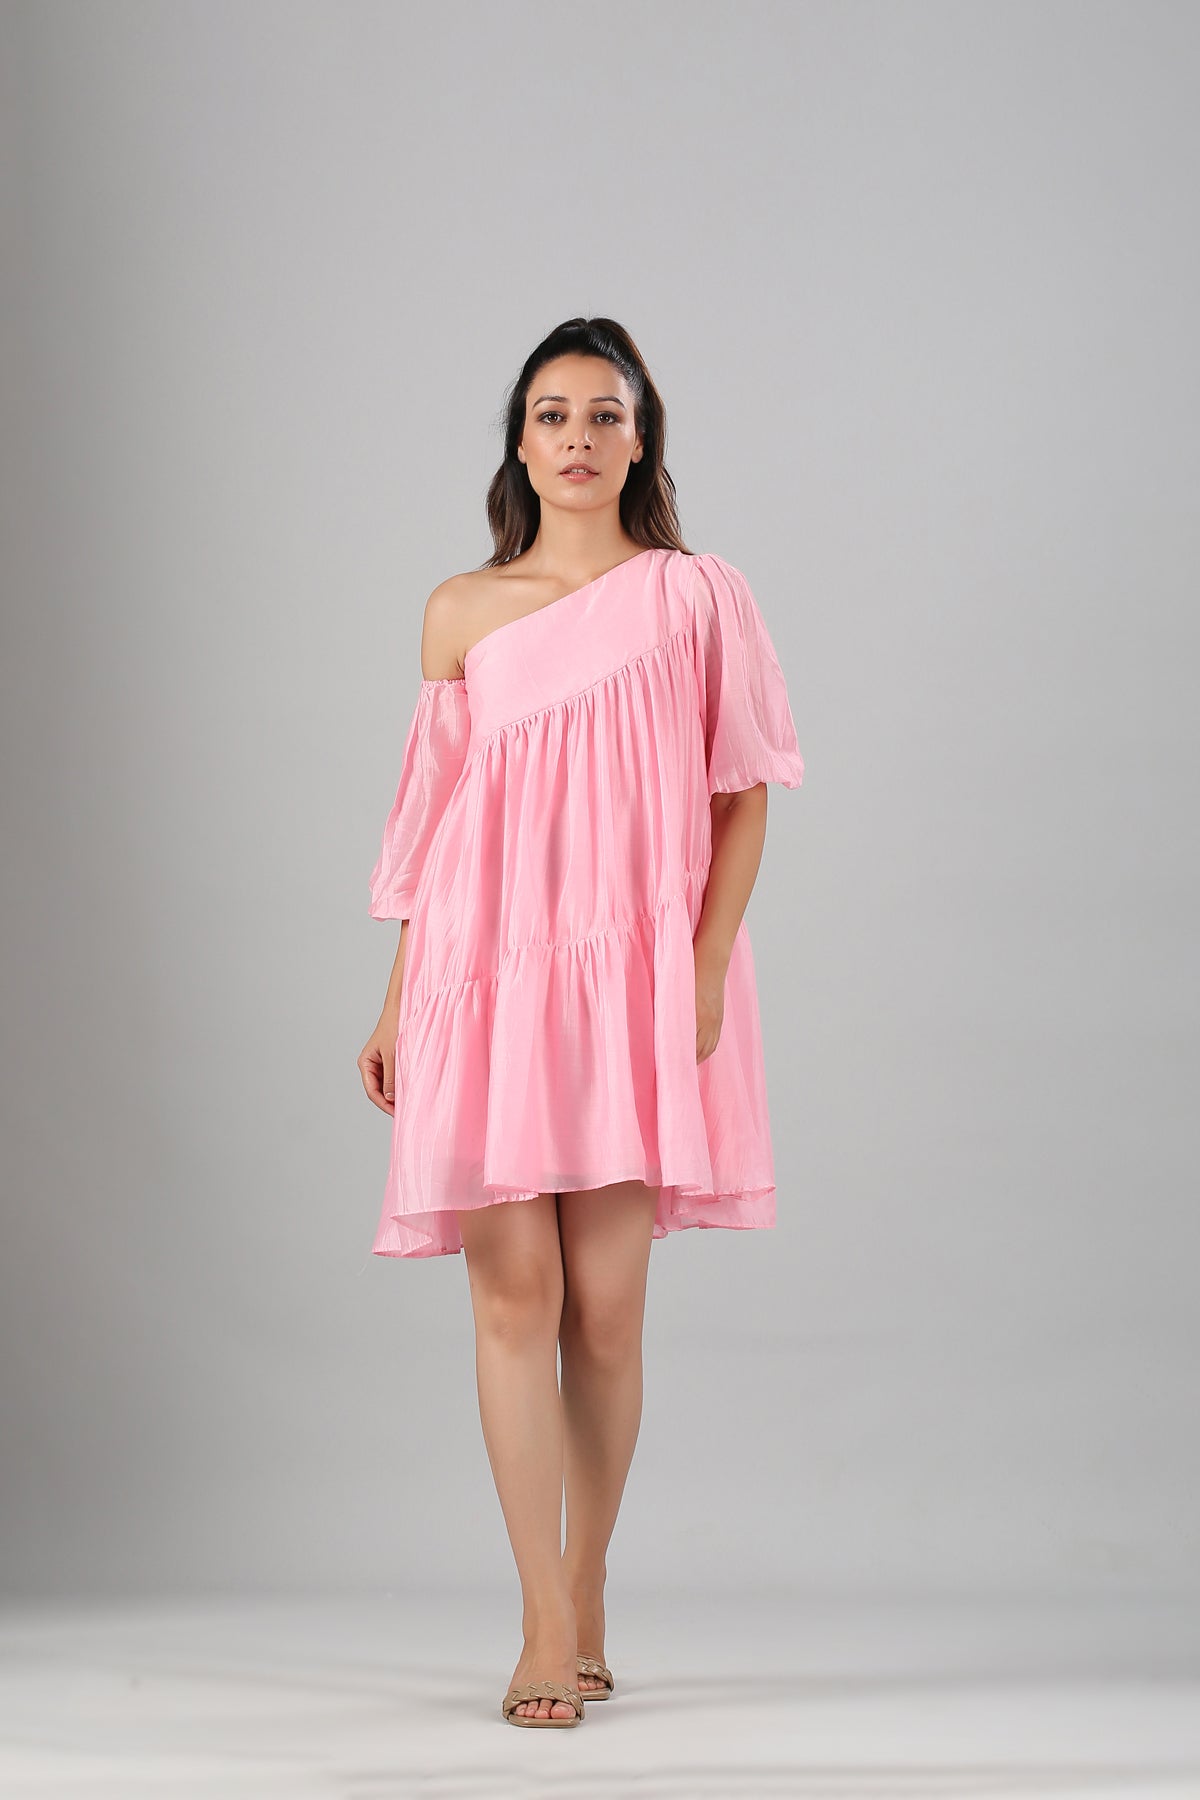 Pink Off Shoulder Dress at Kamakhyaa by MOH-The Eternal Dhaga. This item is Casual Wear, Cotton, Moh-The eternal Dhaga, Natural, Off-Shoulder Dresses, Pink, Relaxed Fit, Solids, Womenswear